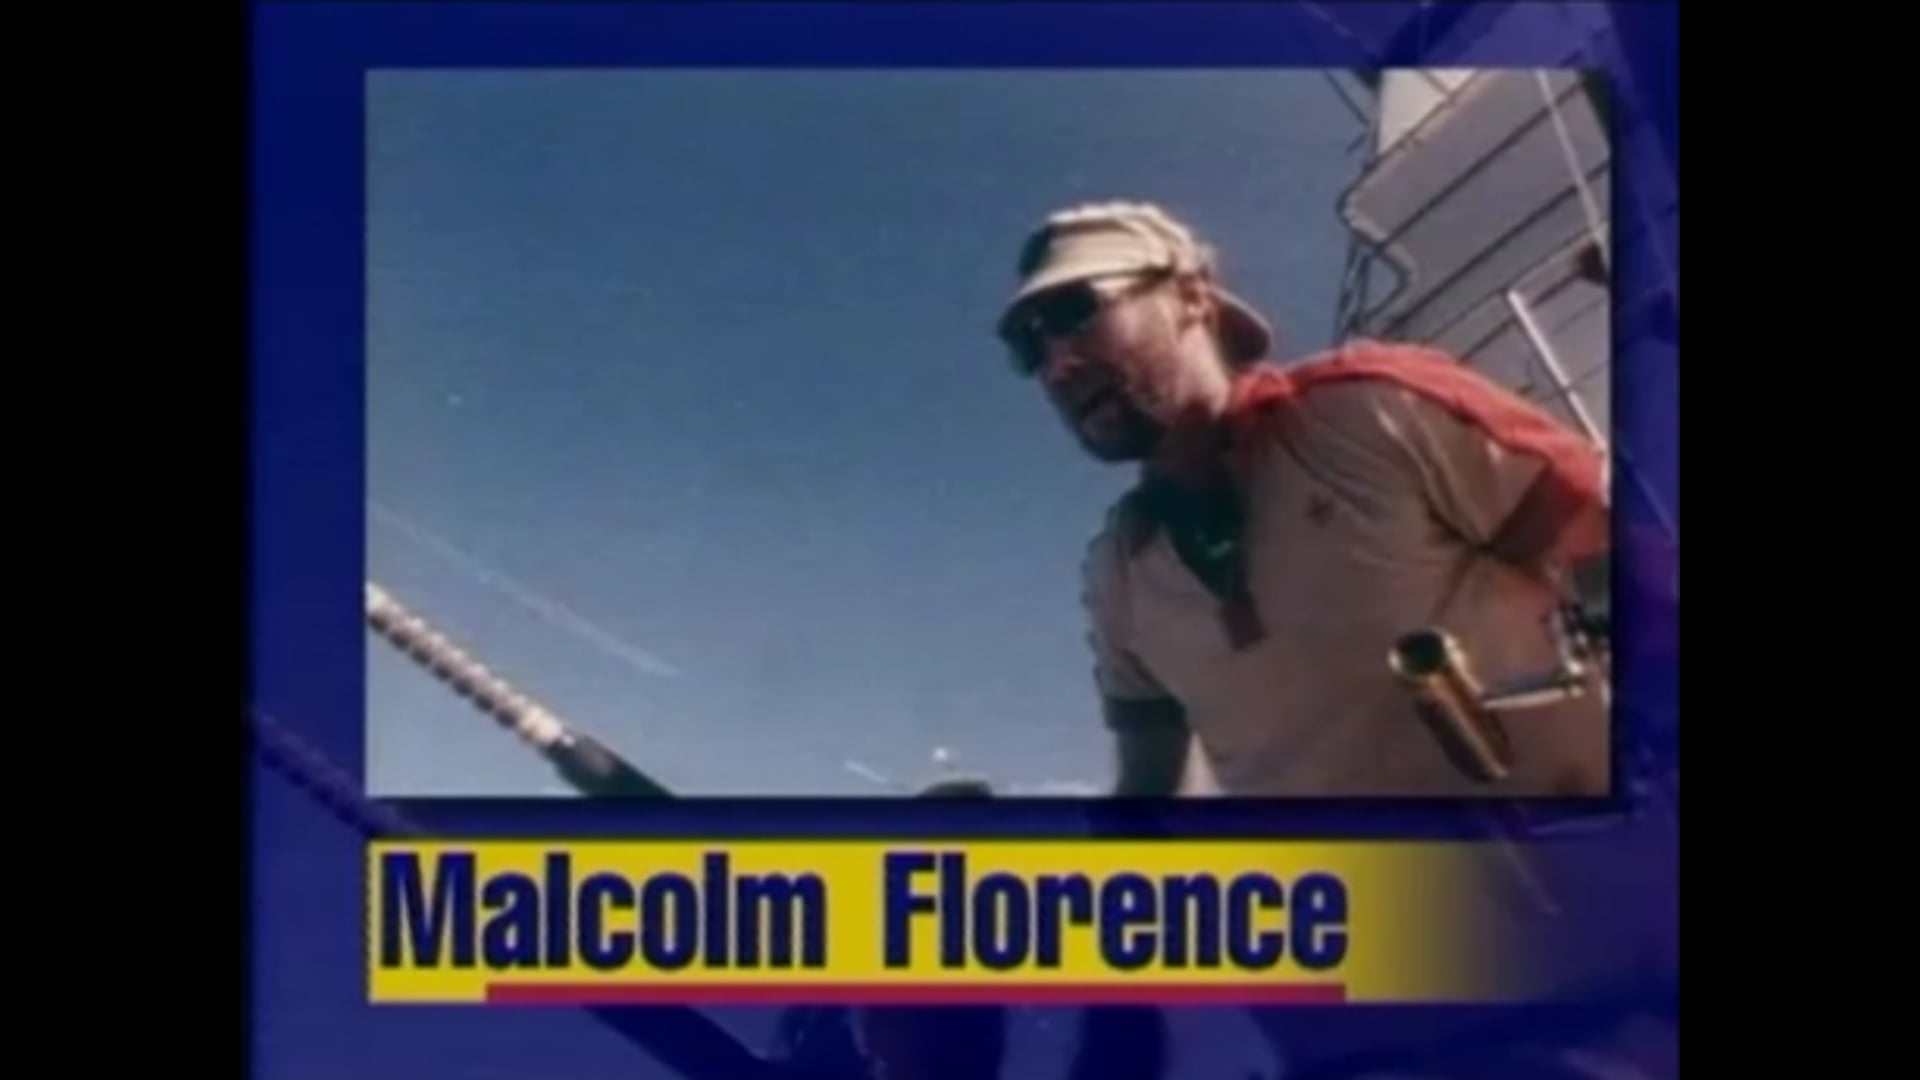 In Memory of Mal Florence – 1996